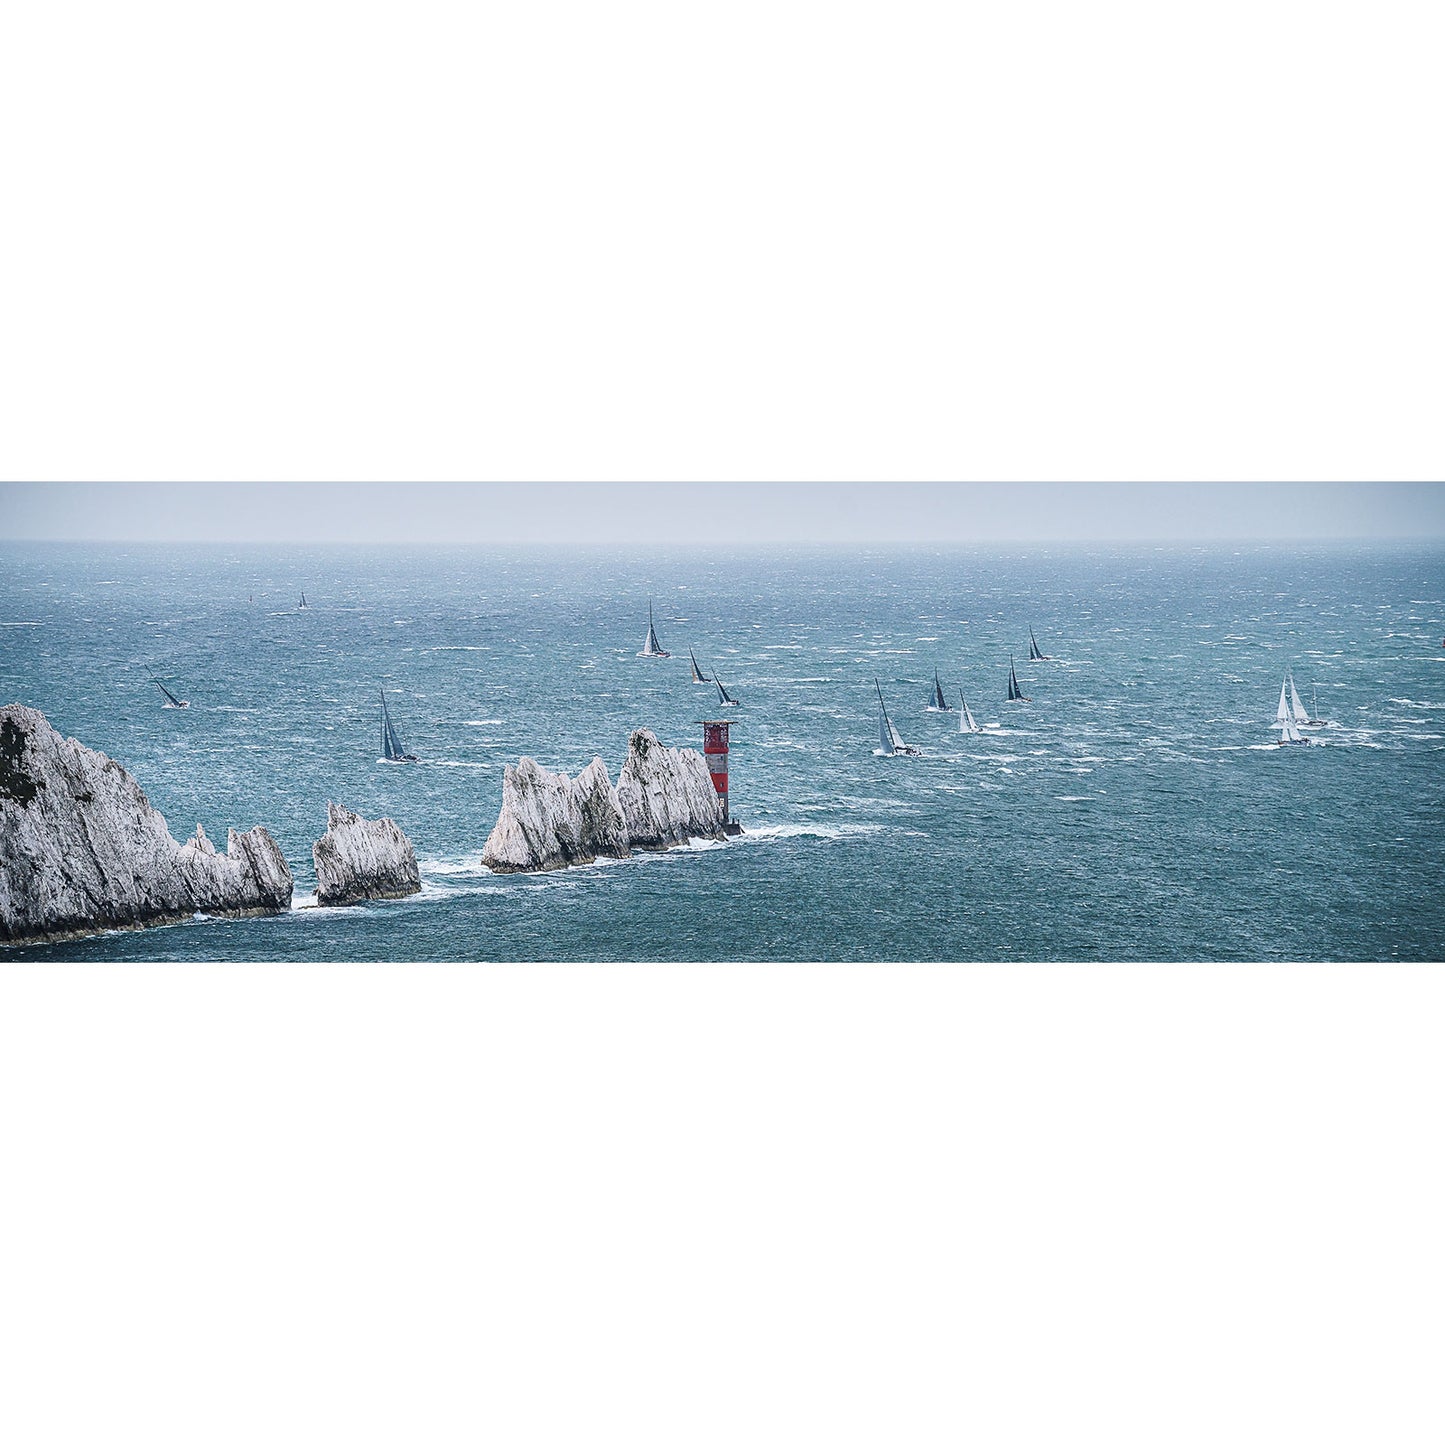 Fastnet Race at The Needles - Available Light Photography